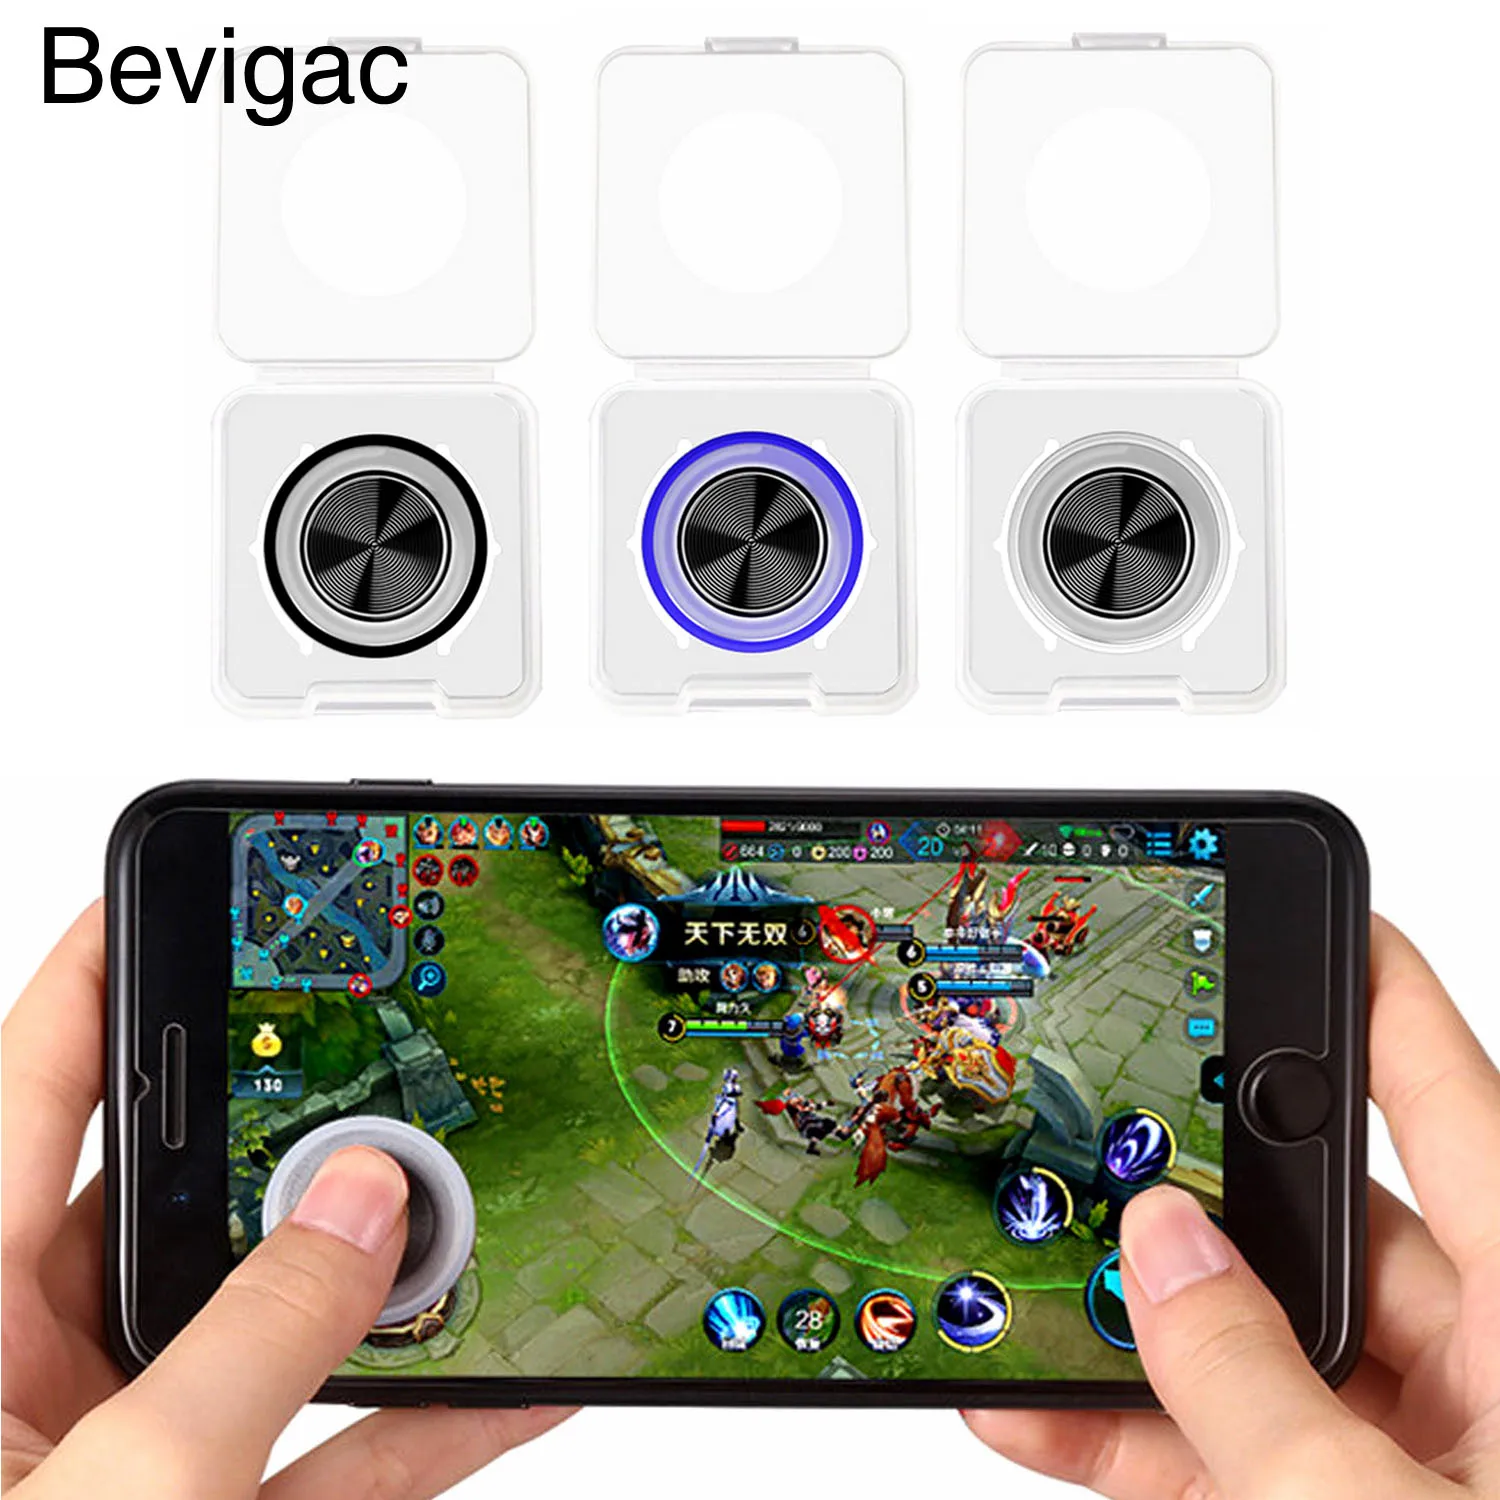 

Bevigac Mobile Game Joystick Rocker Touch Screen Joypad Controller with Dust-proof Storage Box for iPhone iPad Samsung Tablet